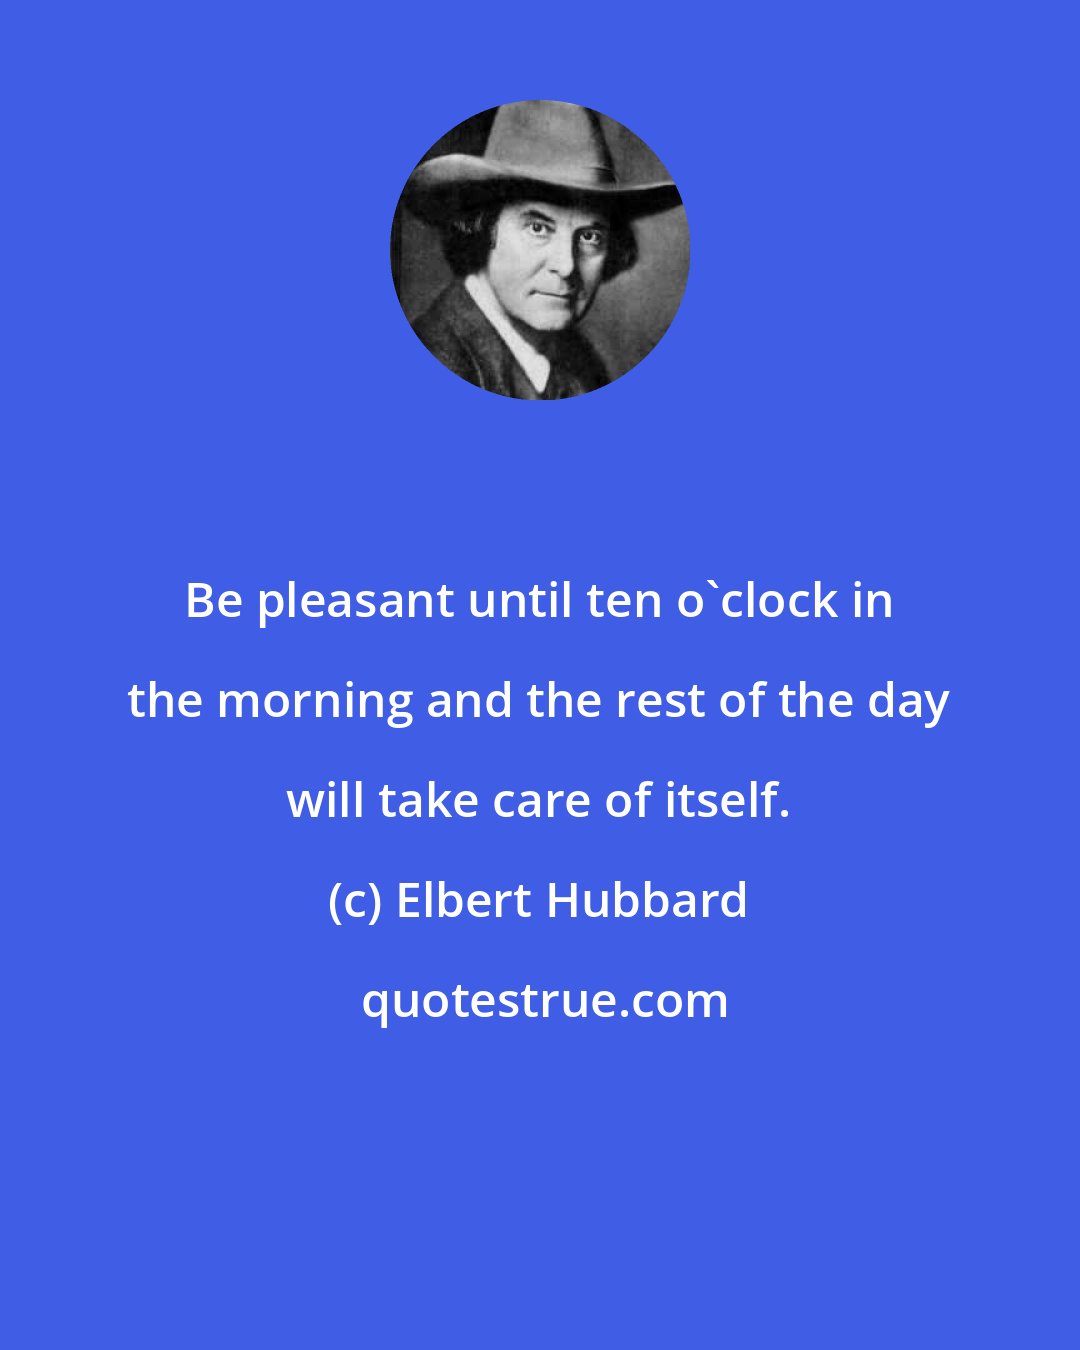 Elbert Hubbard: Be pleasant until ten o'clock in the morning and the rest of the day will take care of itself.